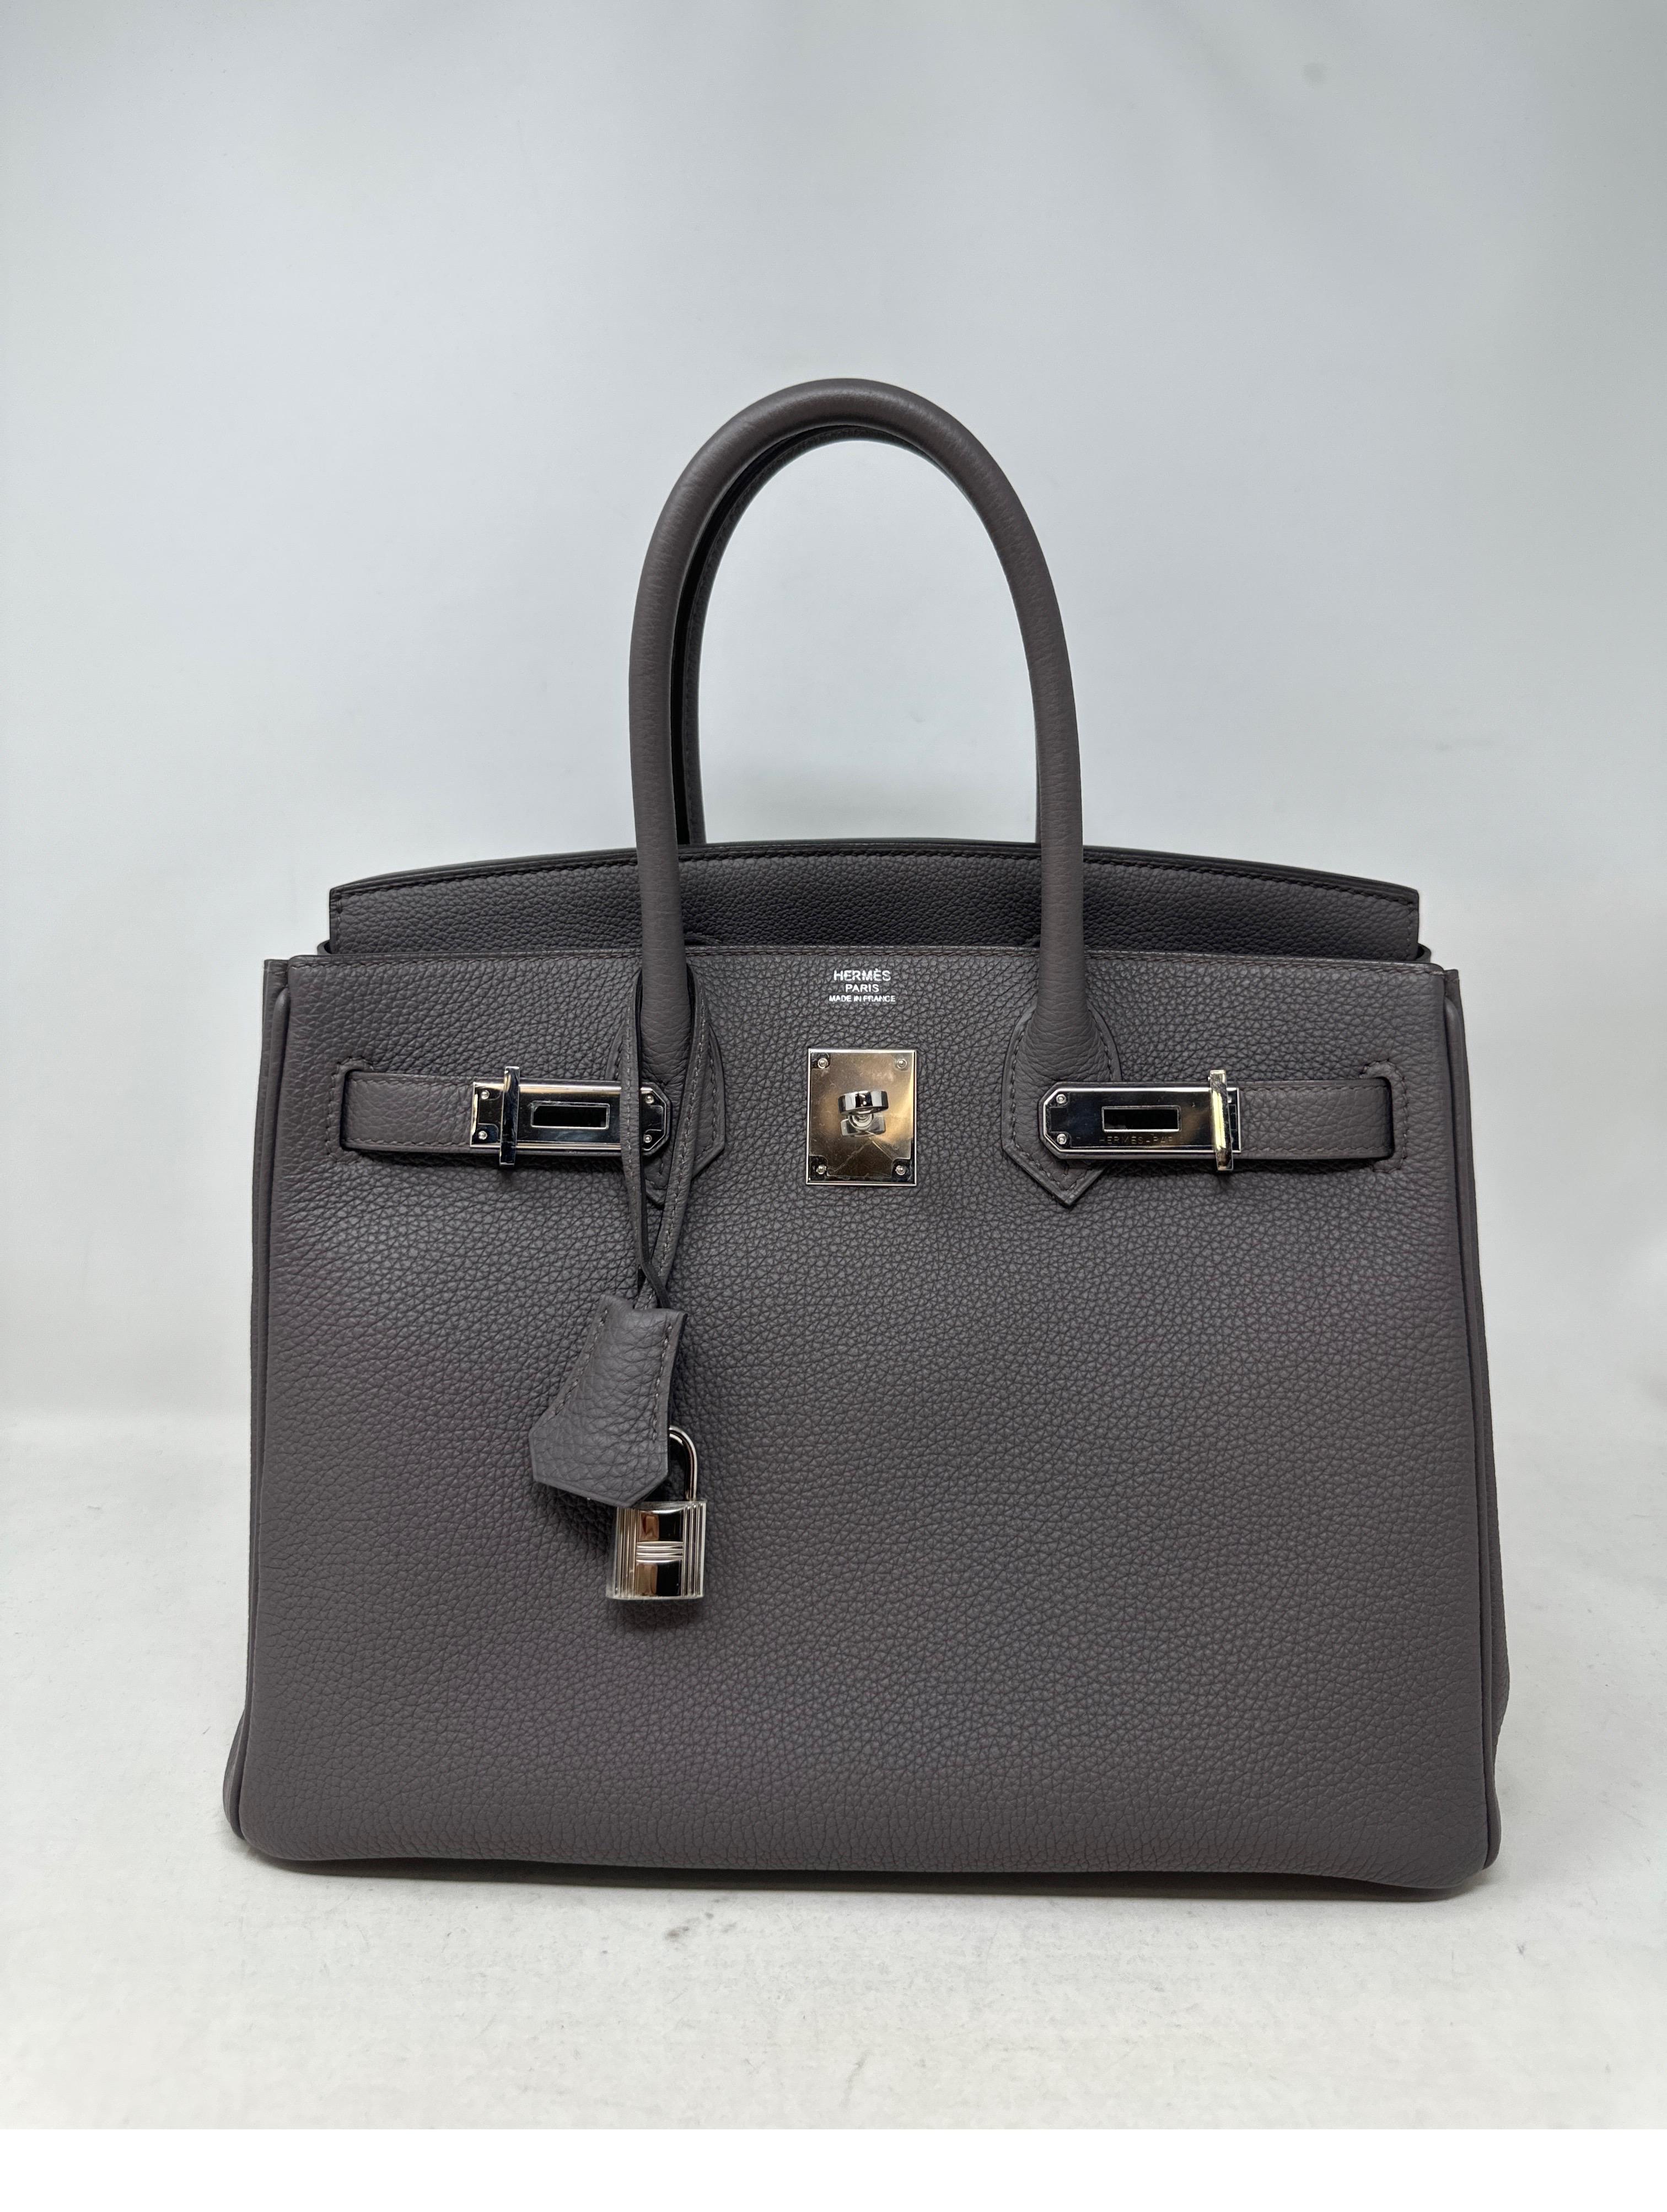 Hermes Etain Birkin 30 Bag. Palladium hardware. Excellent condition like new. Newer bag. Plastic is on the hardware. Most wanted neutral color. Don't miss out on this one. Includes clochette, lock, keys, and dust bag. Includes original receipt.